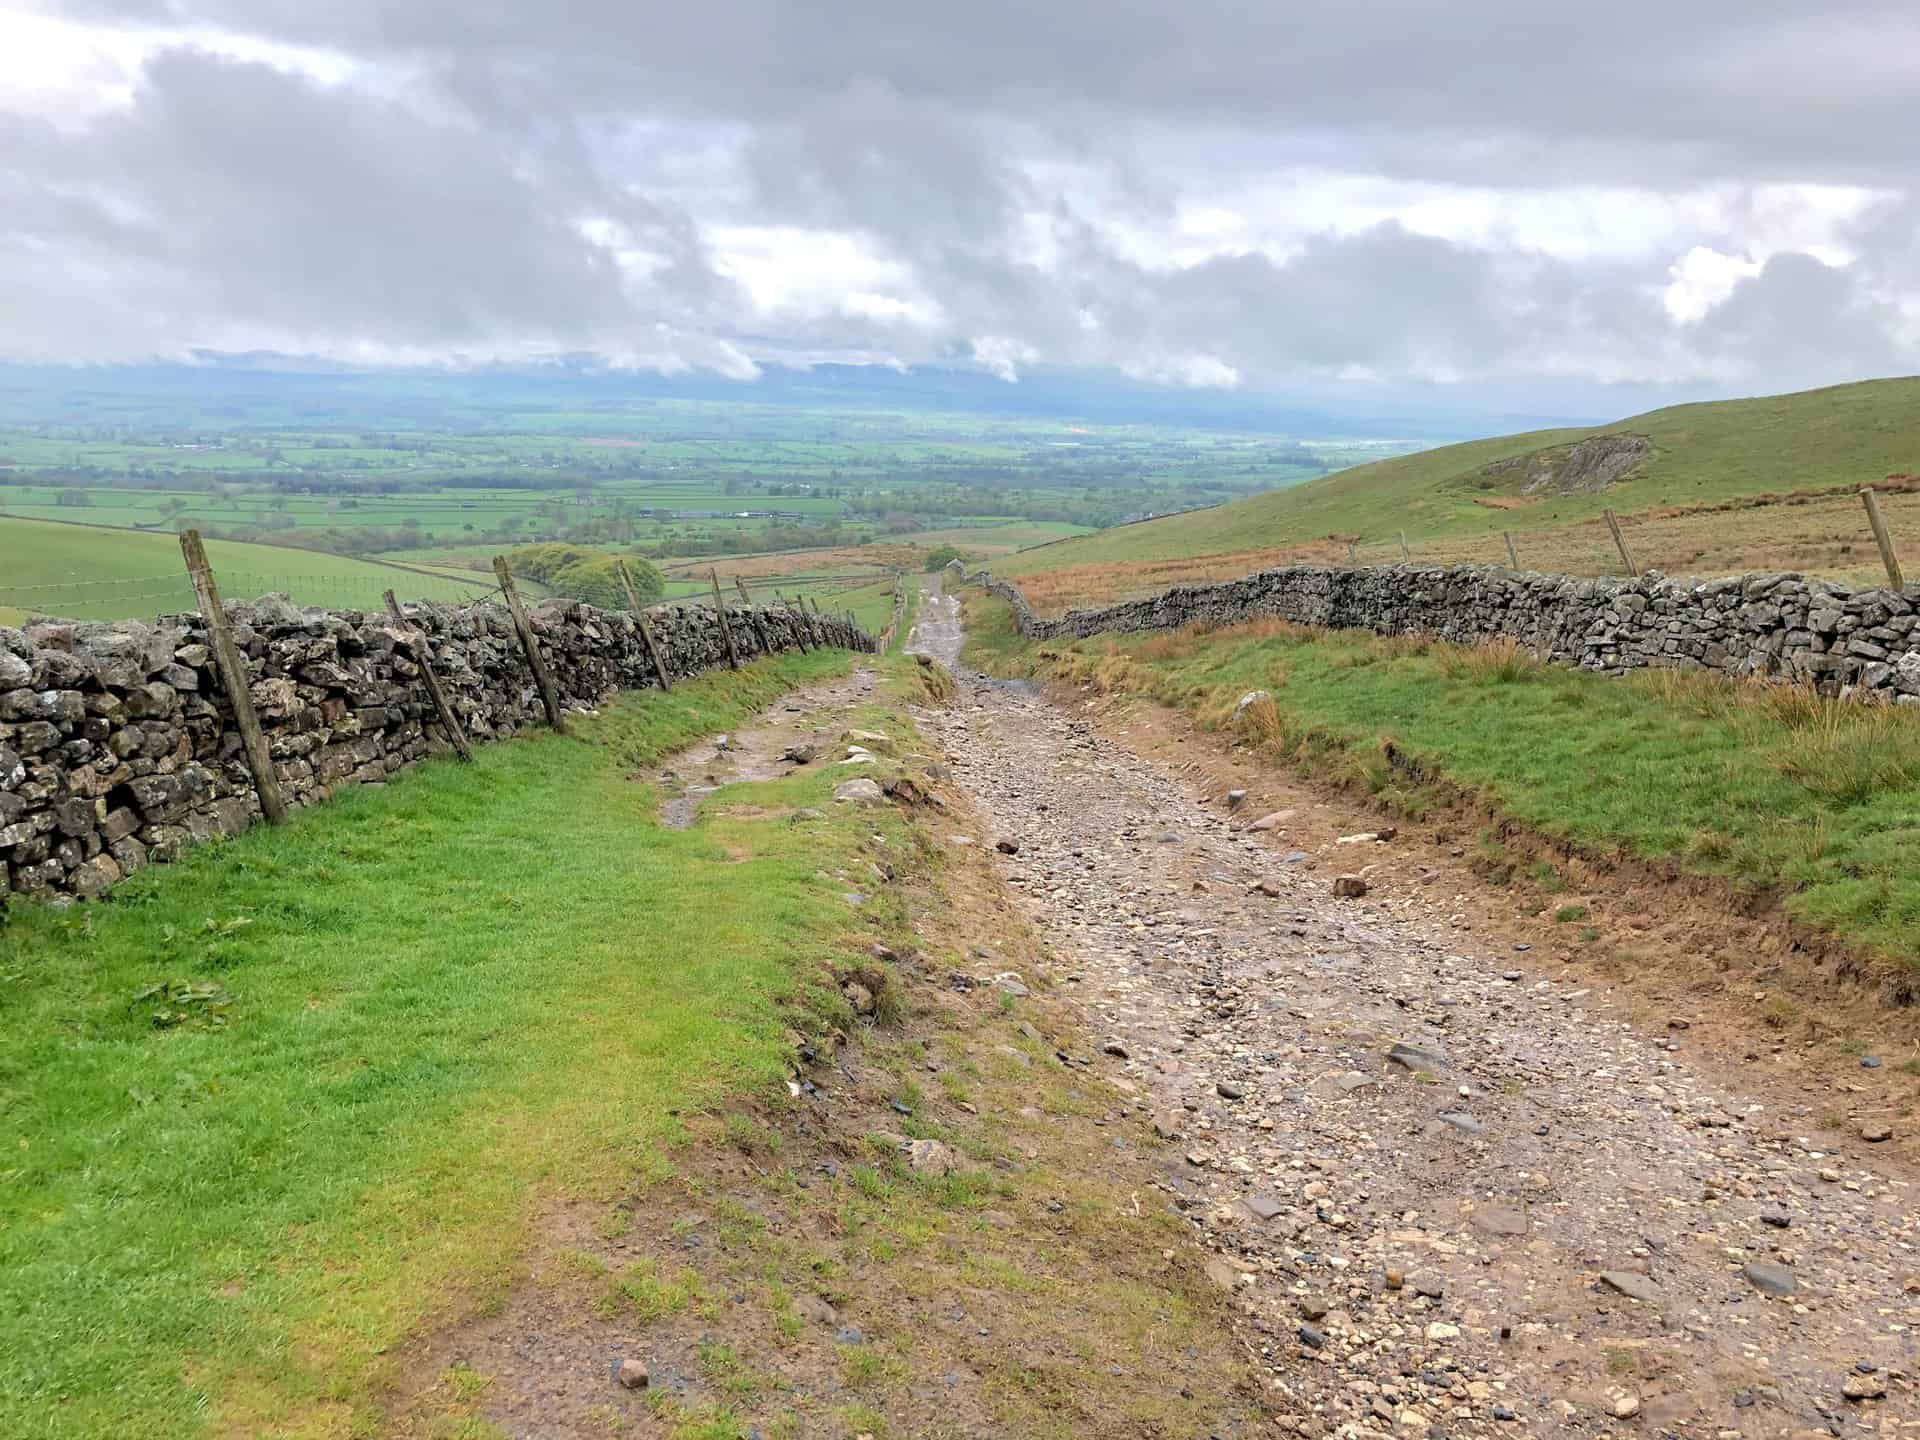 Looking back towards Appleby-in-Westmorland from the Pennine Way near Dod Hill.